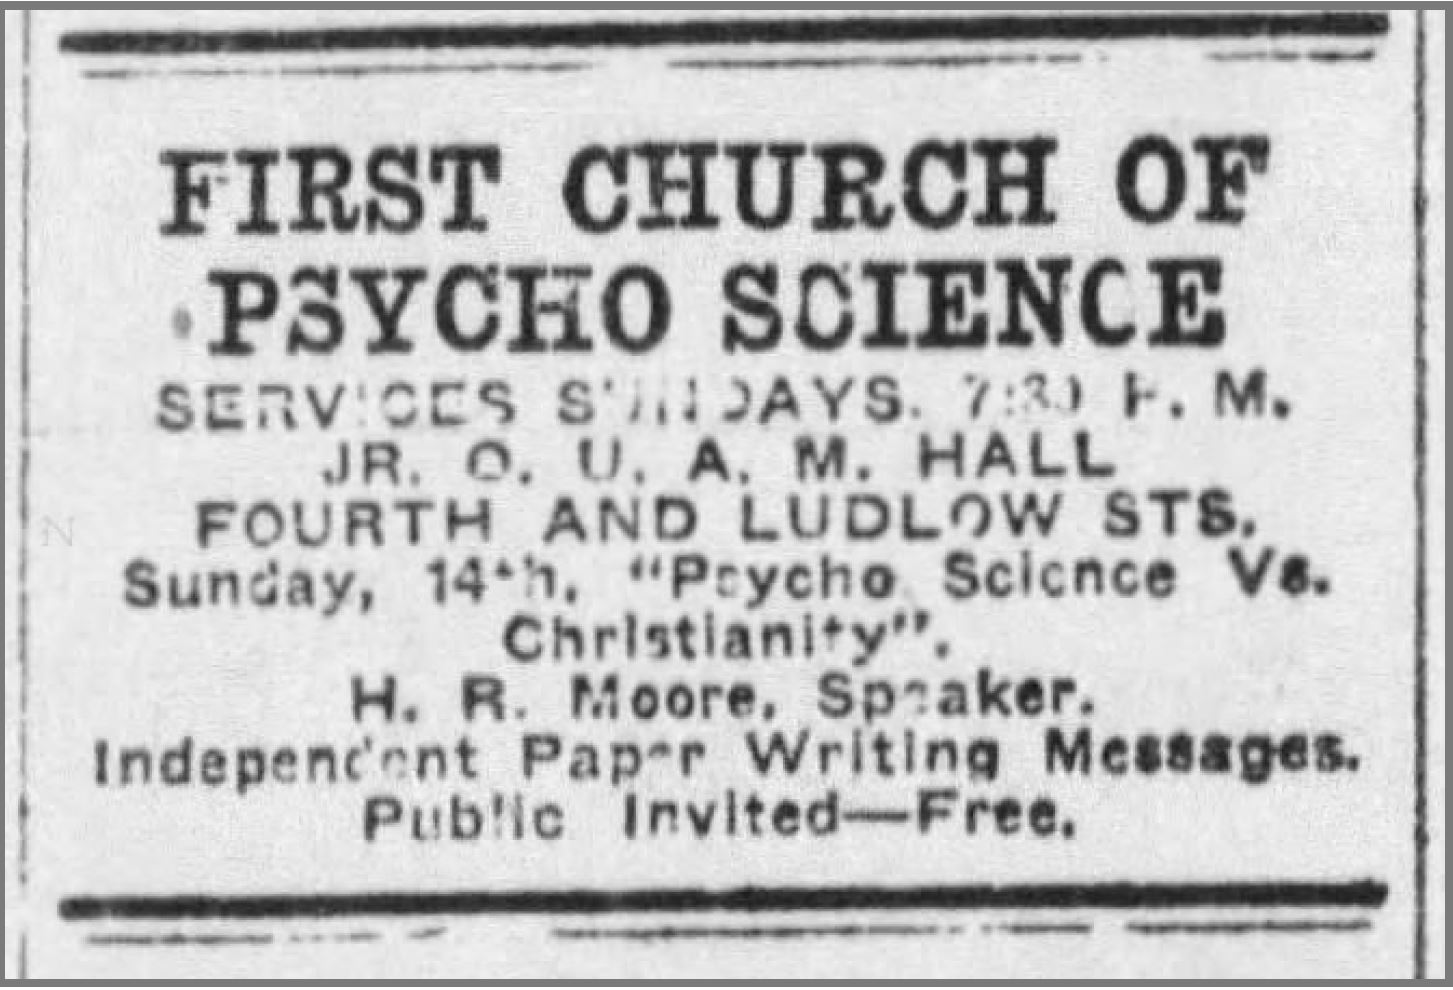 H. R. Moore, Speaker. (Nov. 13, 1920). Psycho Science vs. Christianity. First Church of Psycho Science (Dayton, OH), Fourth and Ludlow Sts. (Dayton Daily News offices). The Dayton Herald.